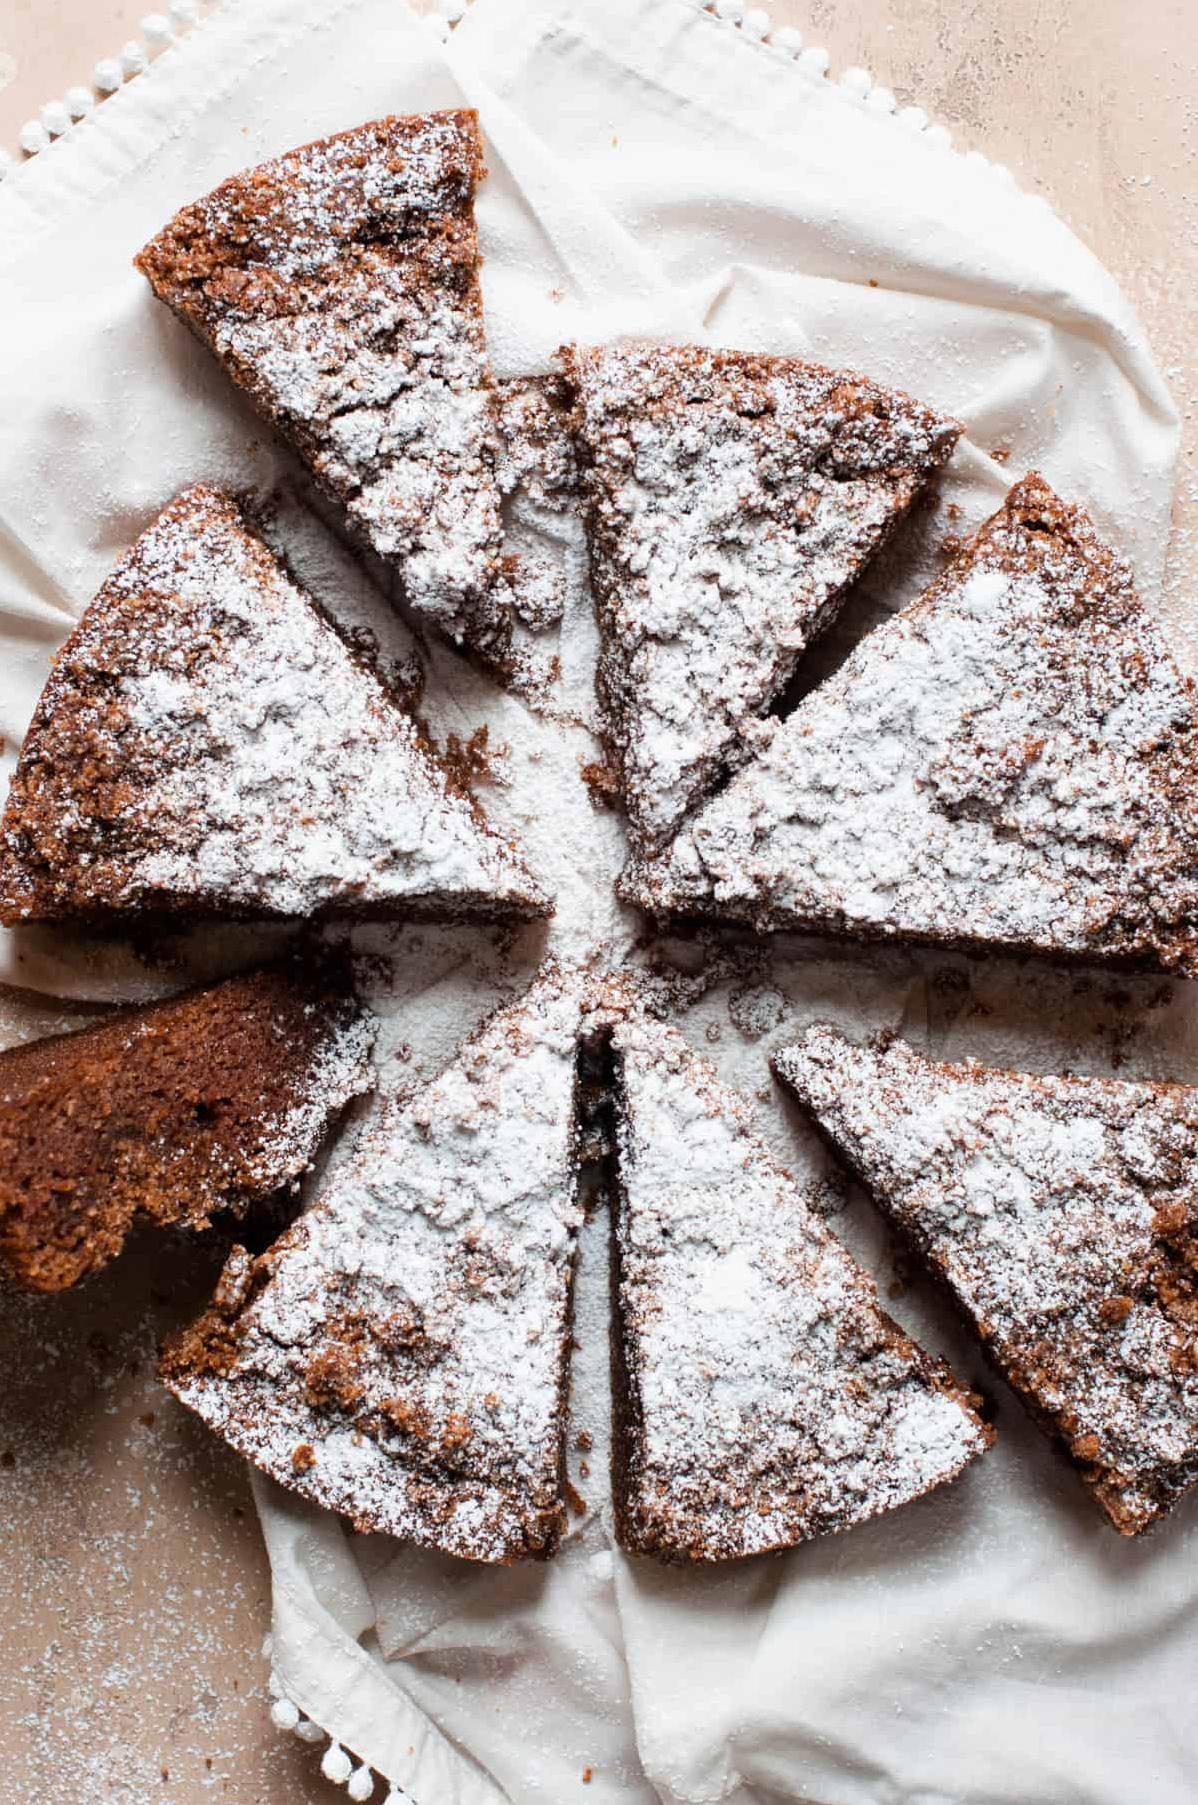  An easy-to-make recipe that will become a regular in your baking rotation.